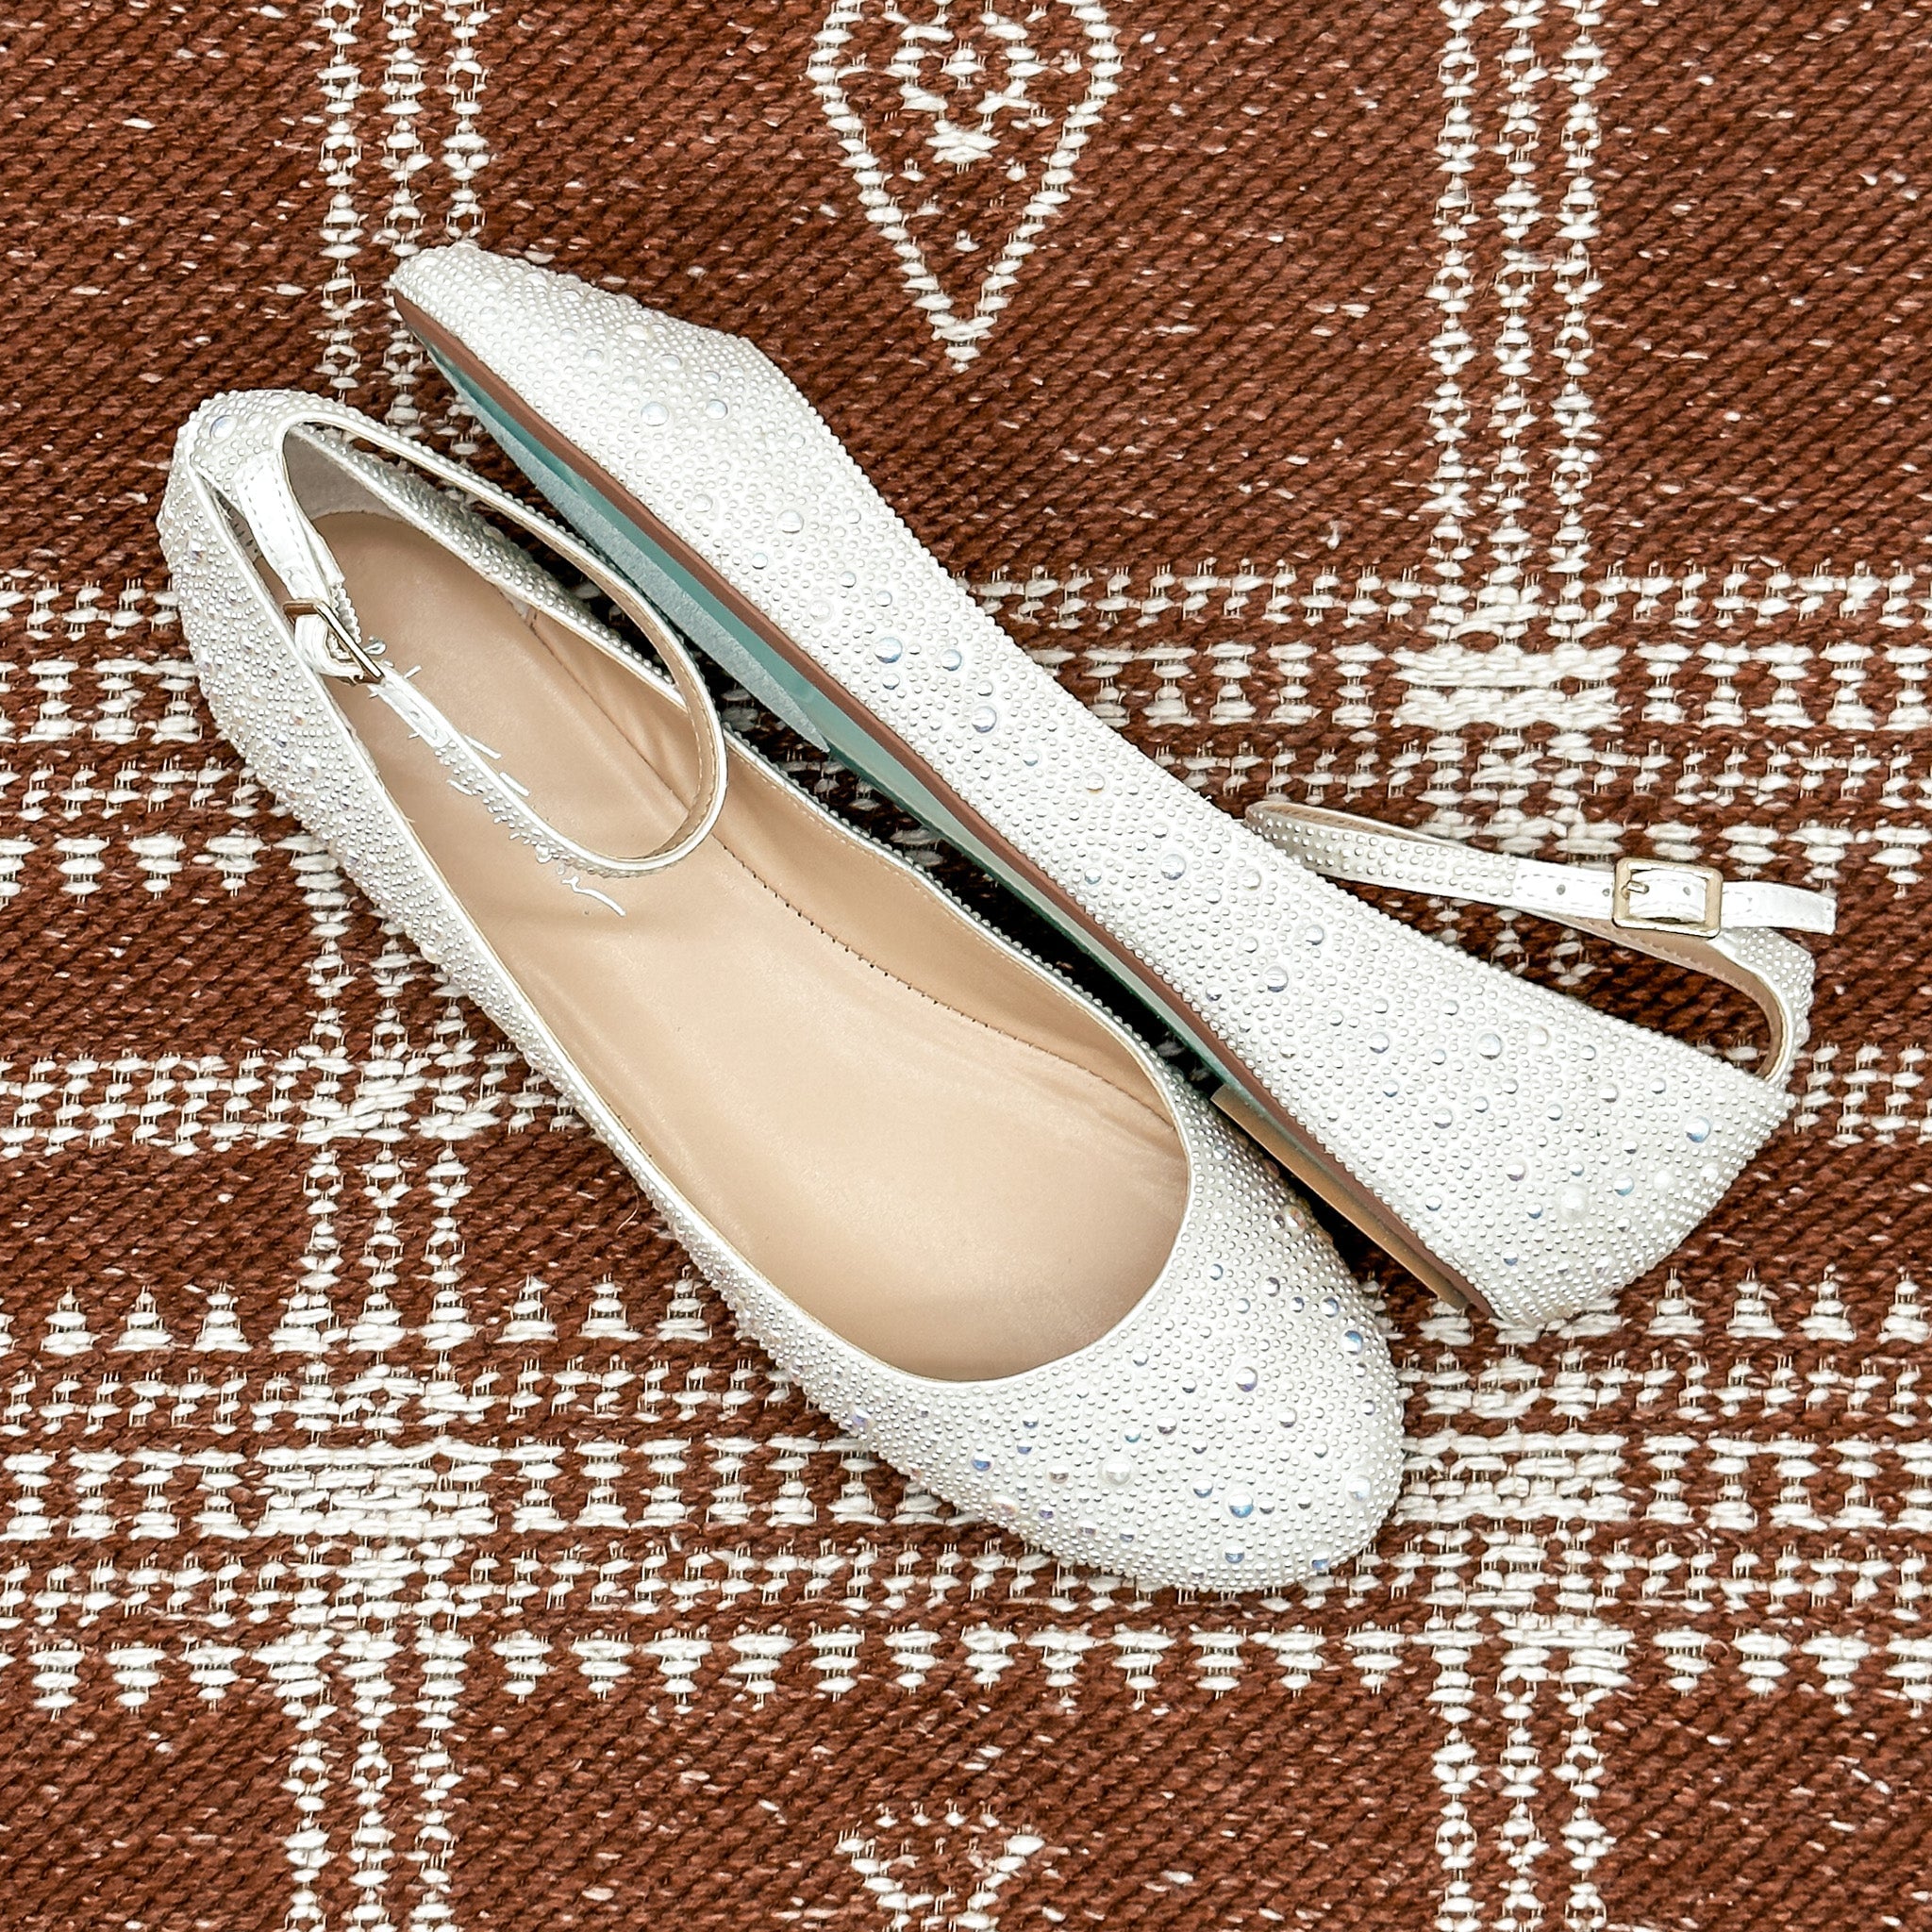 Ace Flats in Ivory